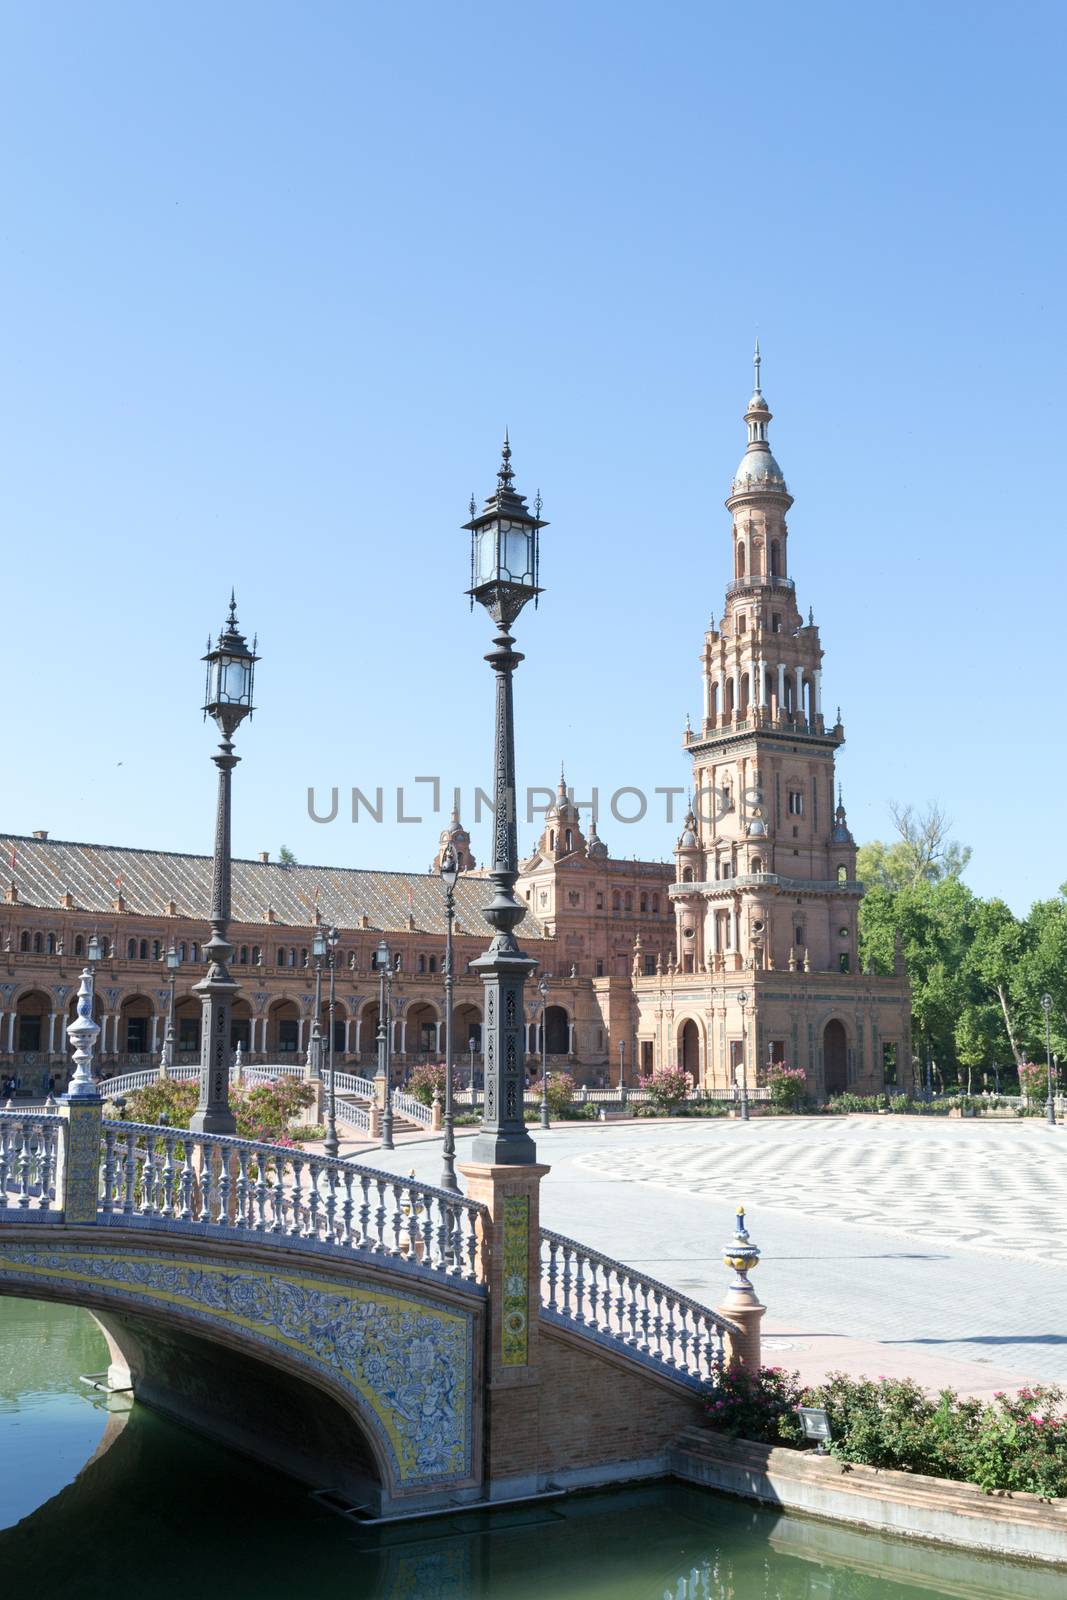 Plaza de España (Spain square) built in 1928 for the Ibero-American Exposition of 1929